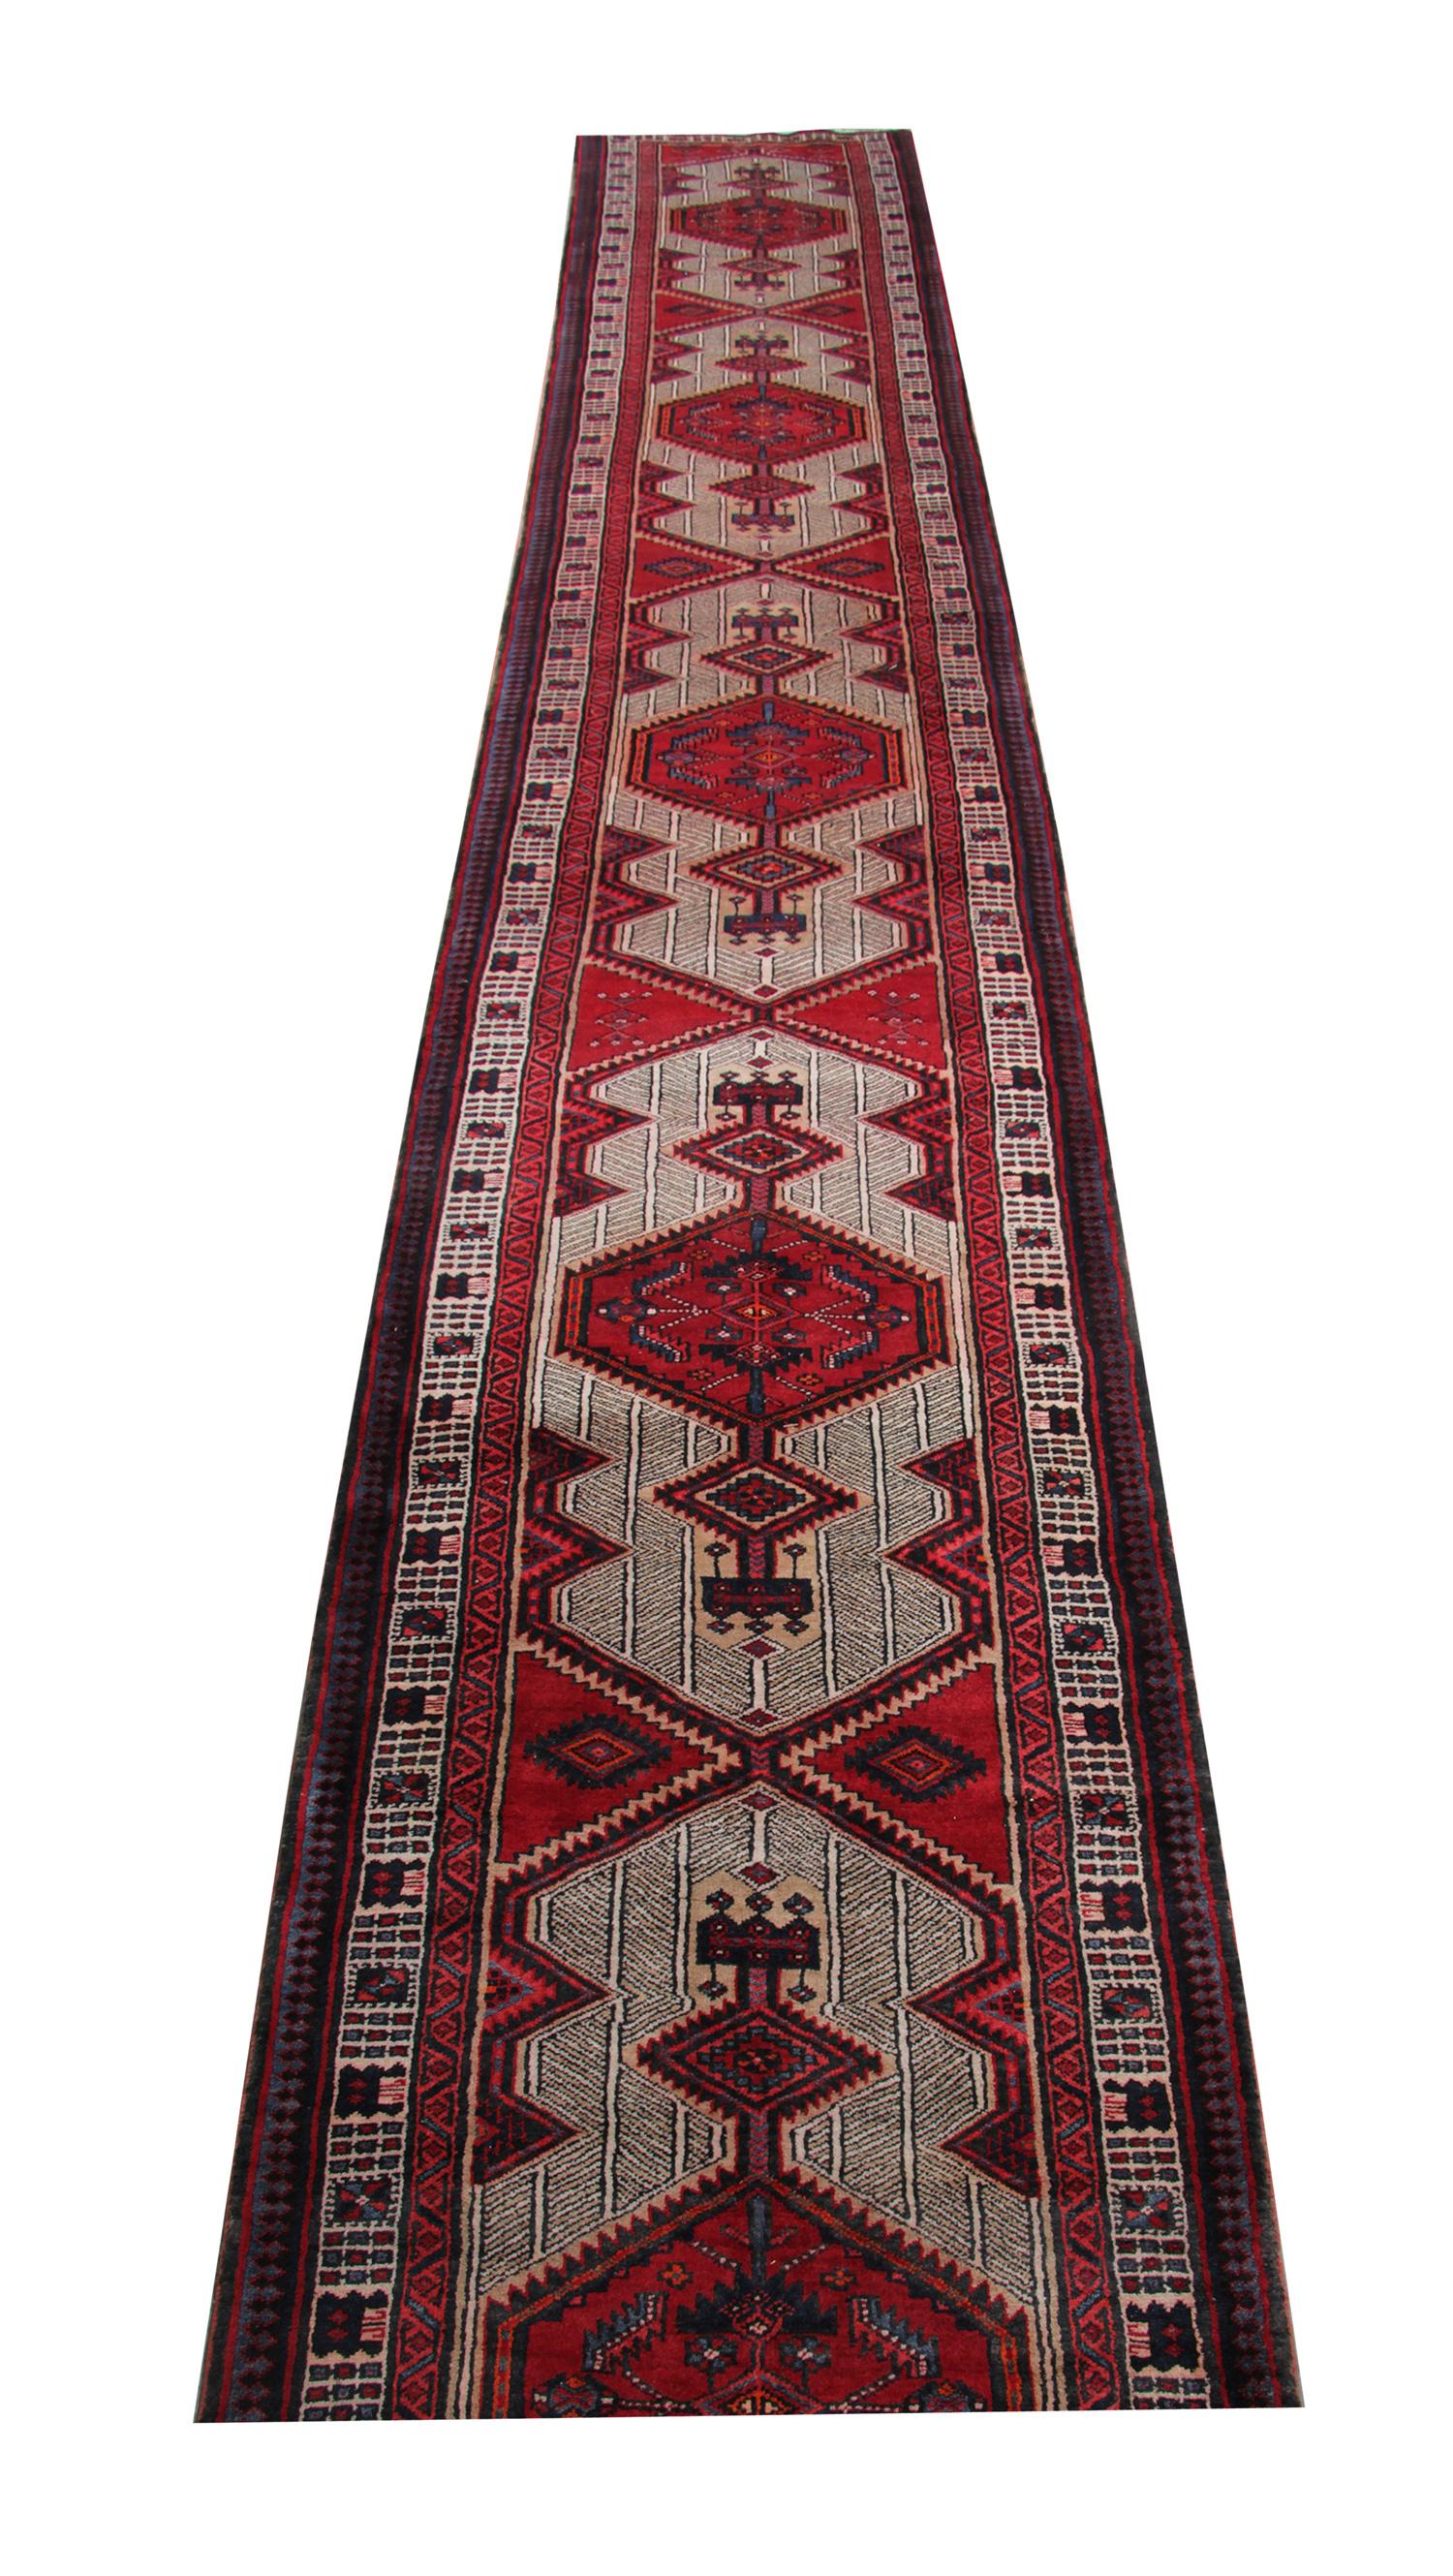 This fine wool runner rug was woven by hand and features a symmetrical repeat pattern design. Woven on a cream background with red accents. Intricately constructed with sophistication to create the perfect accent runner rug.
Constructed with the